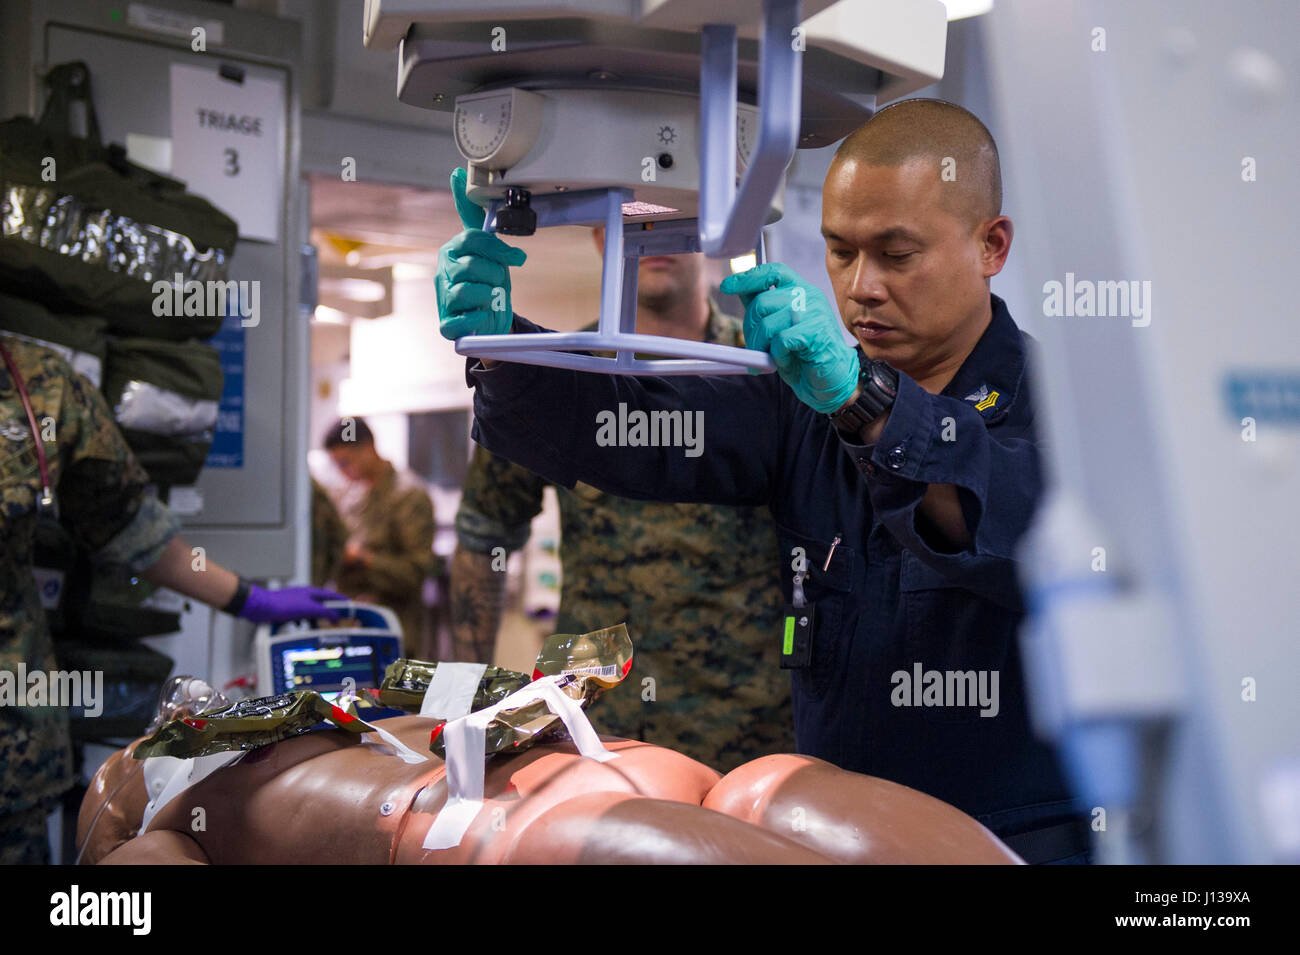 170411-N-FO981-0105 PACIFIC OCEAN (April 11, 2017) Hospital Corpsman 1st Class Loreto Cruz, a native of the Philippines, assigned to the medical team aboard the amphibious assault ship USS America (LHA 6) prepares a patient for an X-ray during a scheduled casualty evacuation drill. America is currently underway with more than 1,000 Sailors and 1,600 Marines conducting Amphibious Squadron/Marine Expeditionary Unit Integration operations in preparation for the ship's maiden deployment later this year. (U.S. Navy photo by Mass Communication Specialist 3rd Class Jacob Holloway/Released) Stock Photo